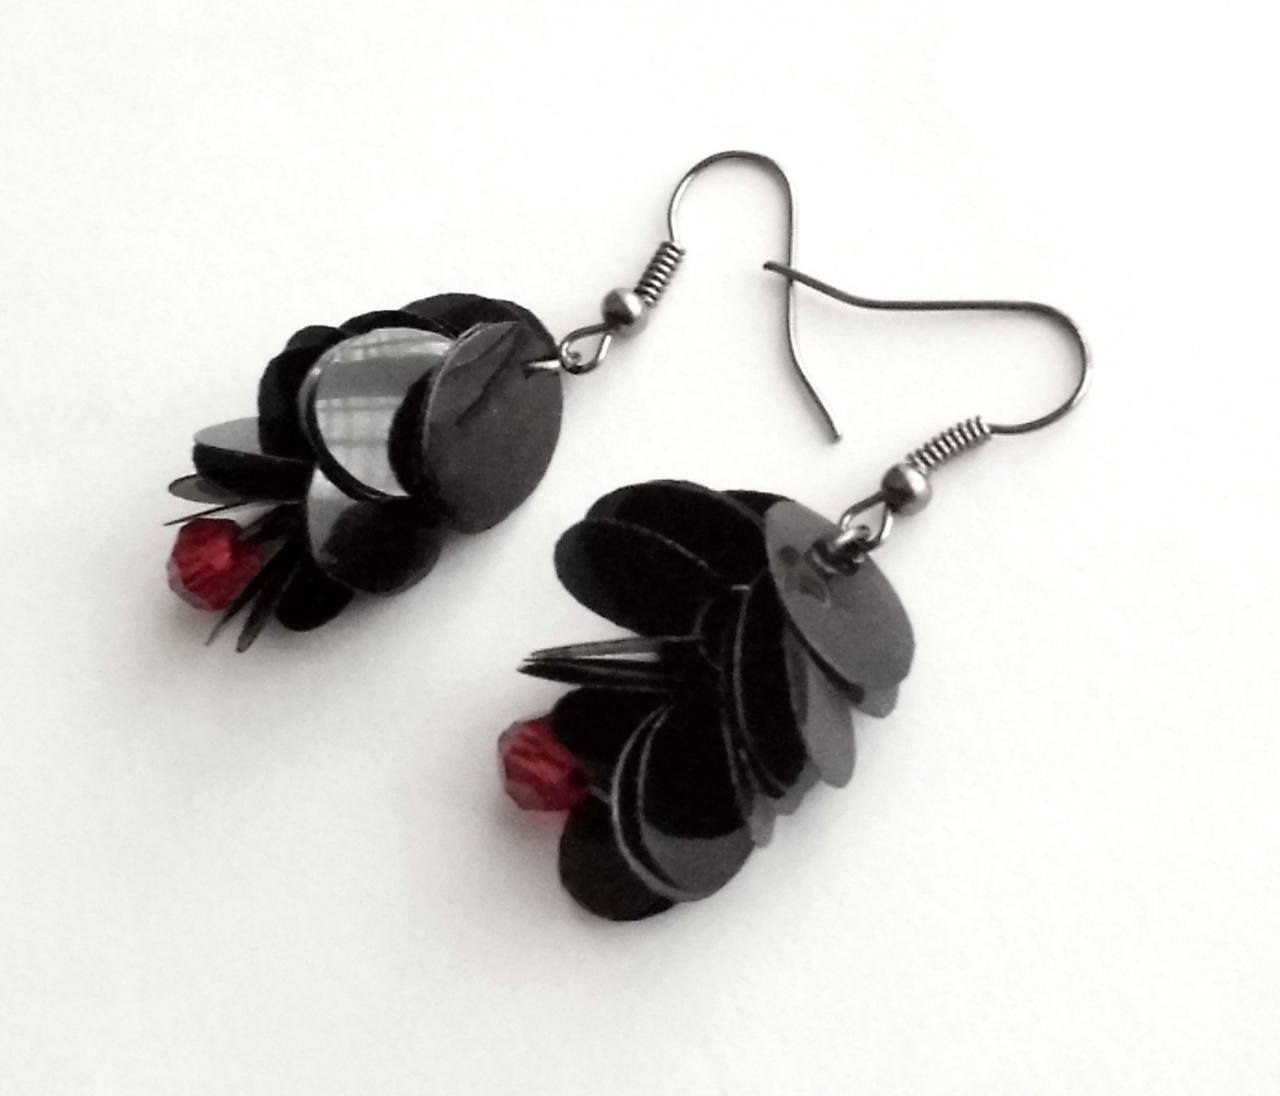 Eco Friendly Gothic Earrings Made Of Recycled Plastic Bottles In Black & Red , Upcycled Jewelry, Repurposed